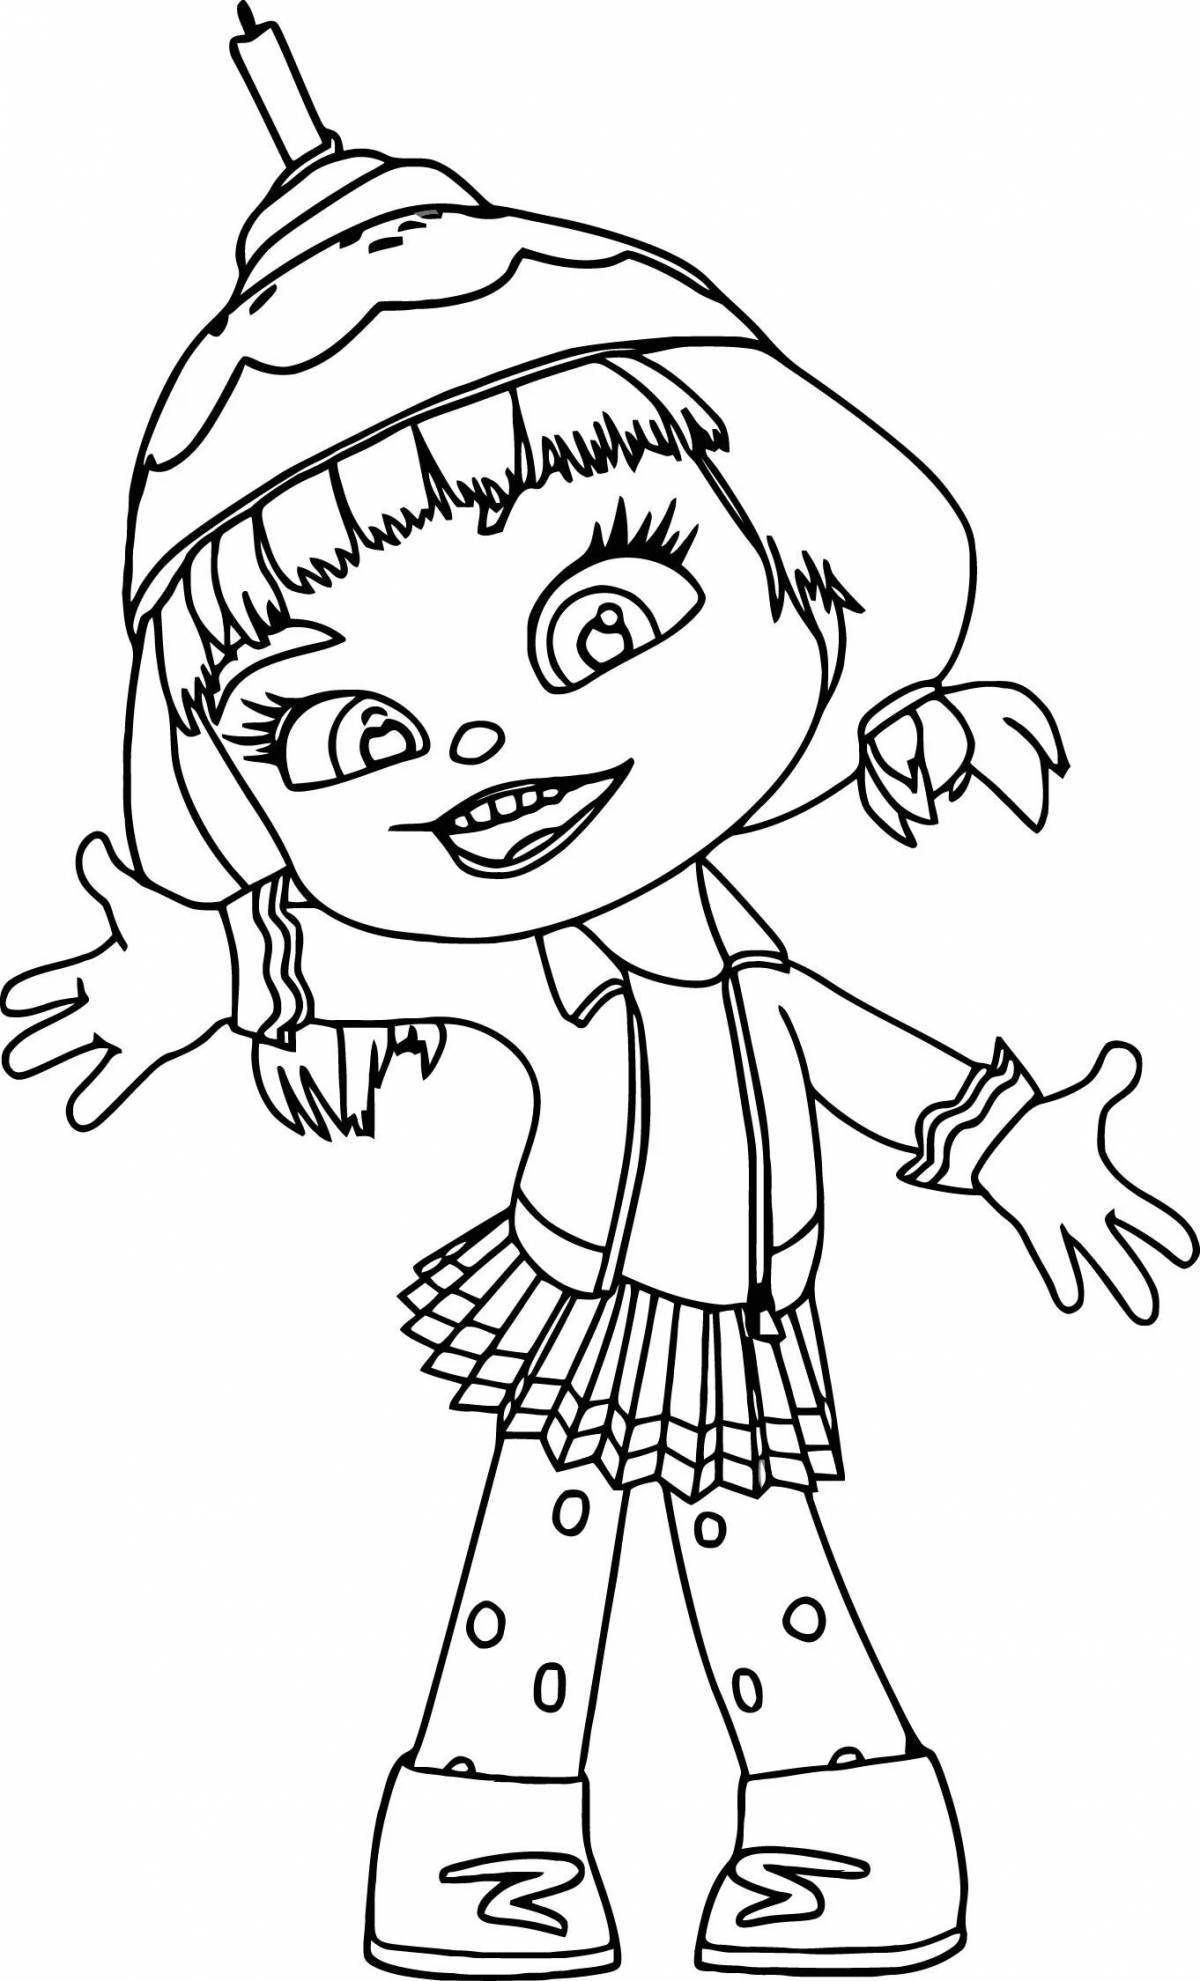 Coloring page charming penelope